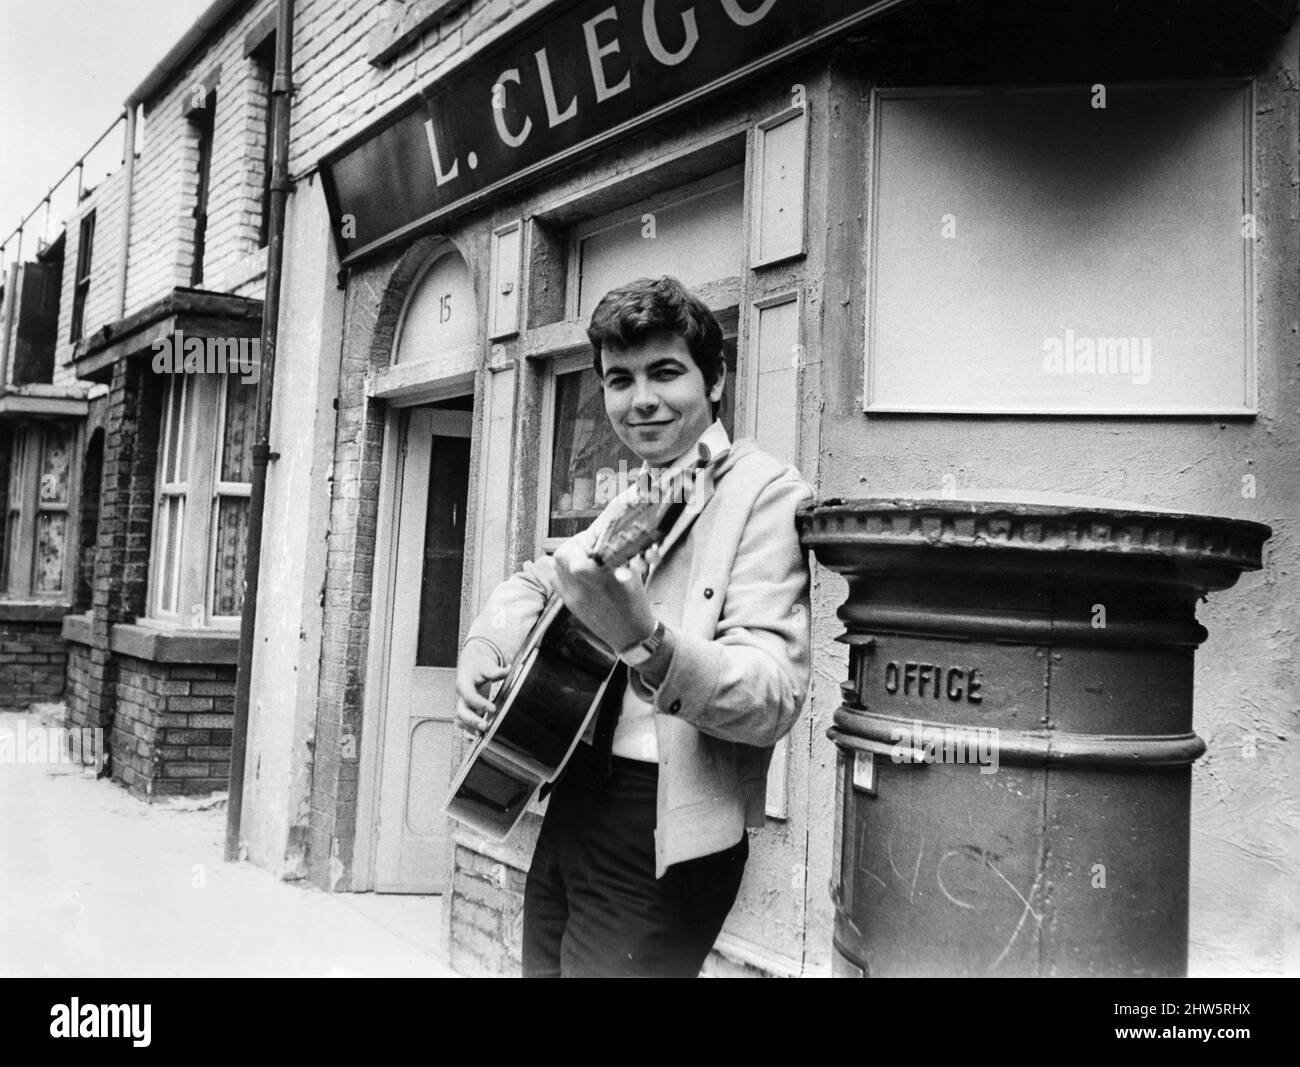 Actor Bill Kenwright who plays Gordon Clegg in the television soap opera Cornation Street, poses in the famous street with his guitar shortly before the release of his new record which he will sing on the programme.  23rd July 1968. Stock Photo